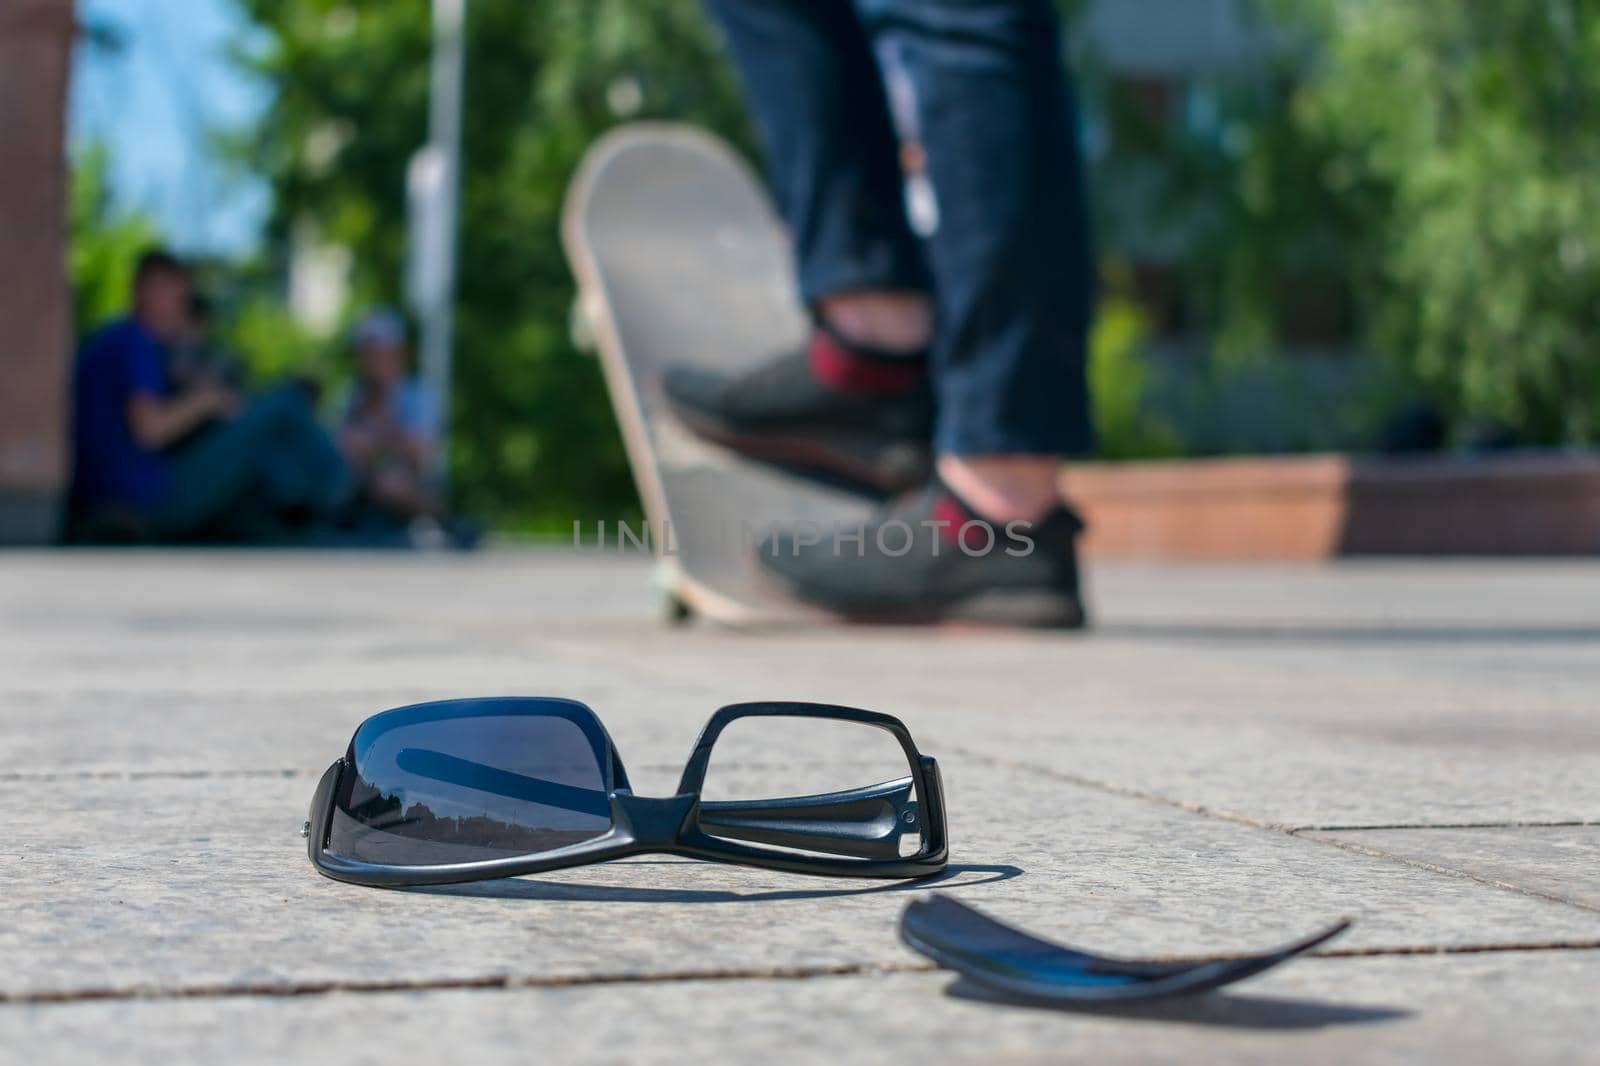 Lost black glasses lie on the road against the background of a man riding a skateboard